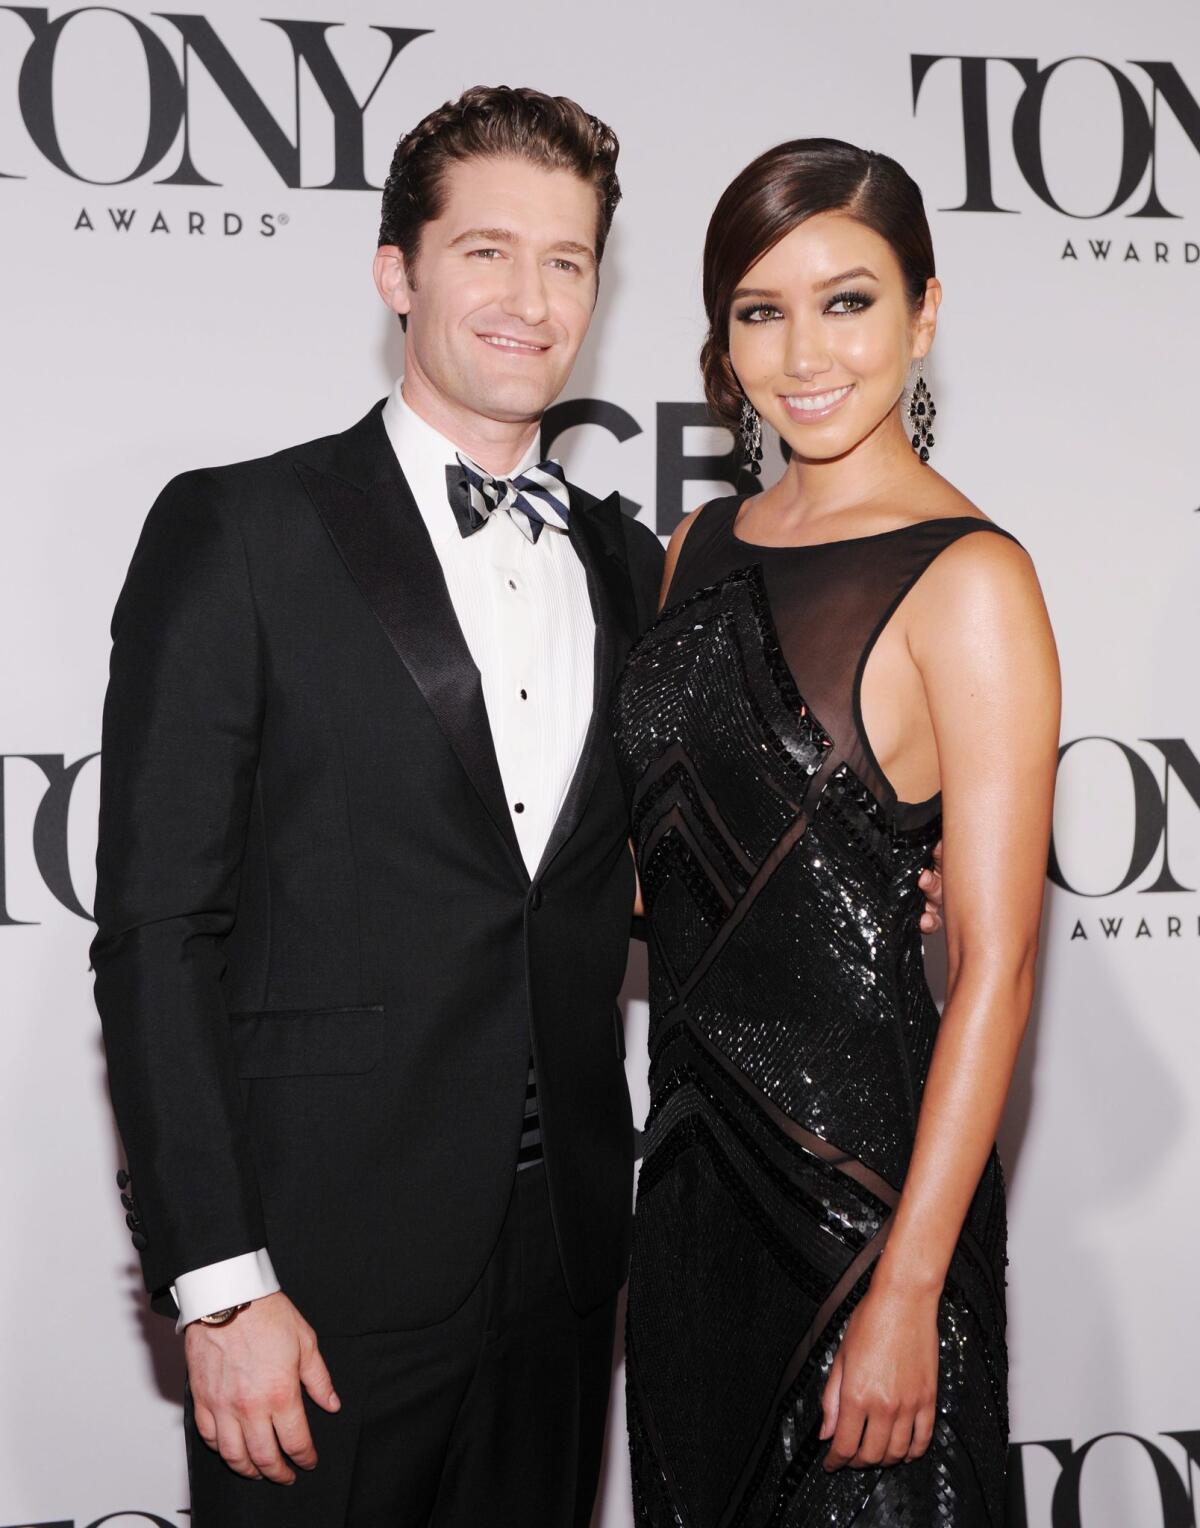 Matthew Morrison and Renee Puente arrive at the Tony Awards earlier this month. The couple's engagement was announced Thursday.